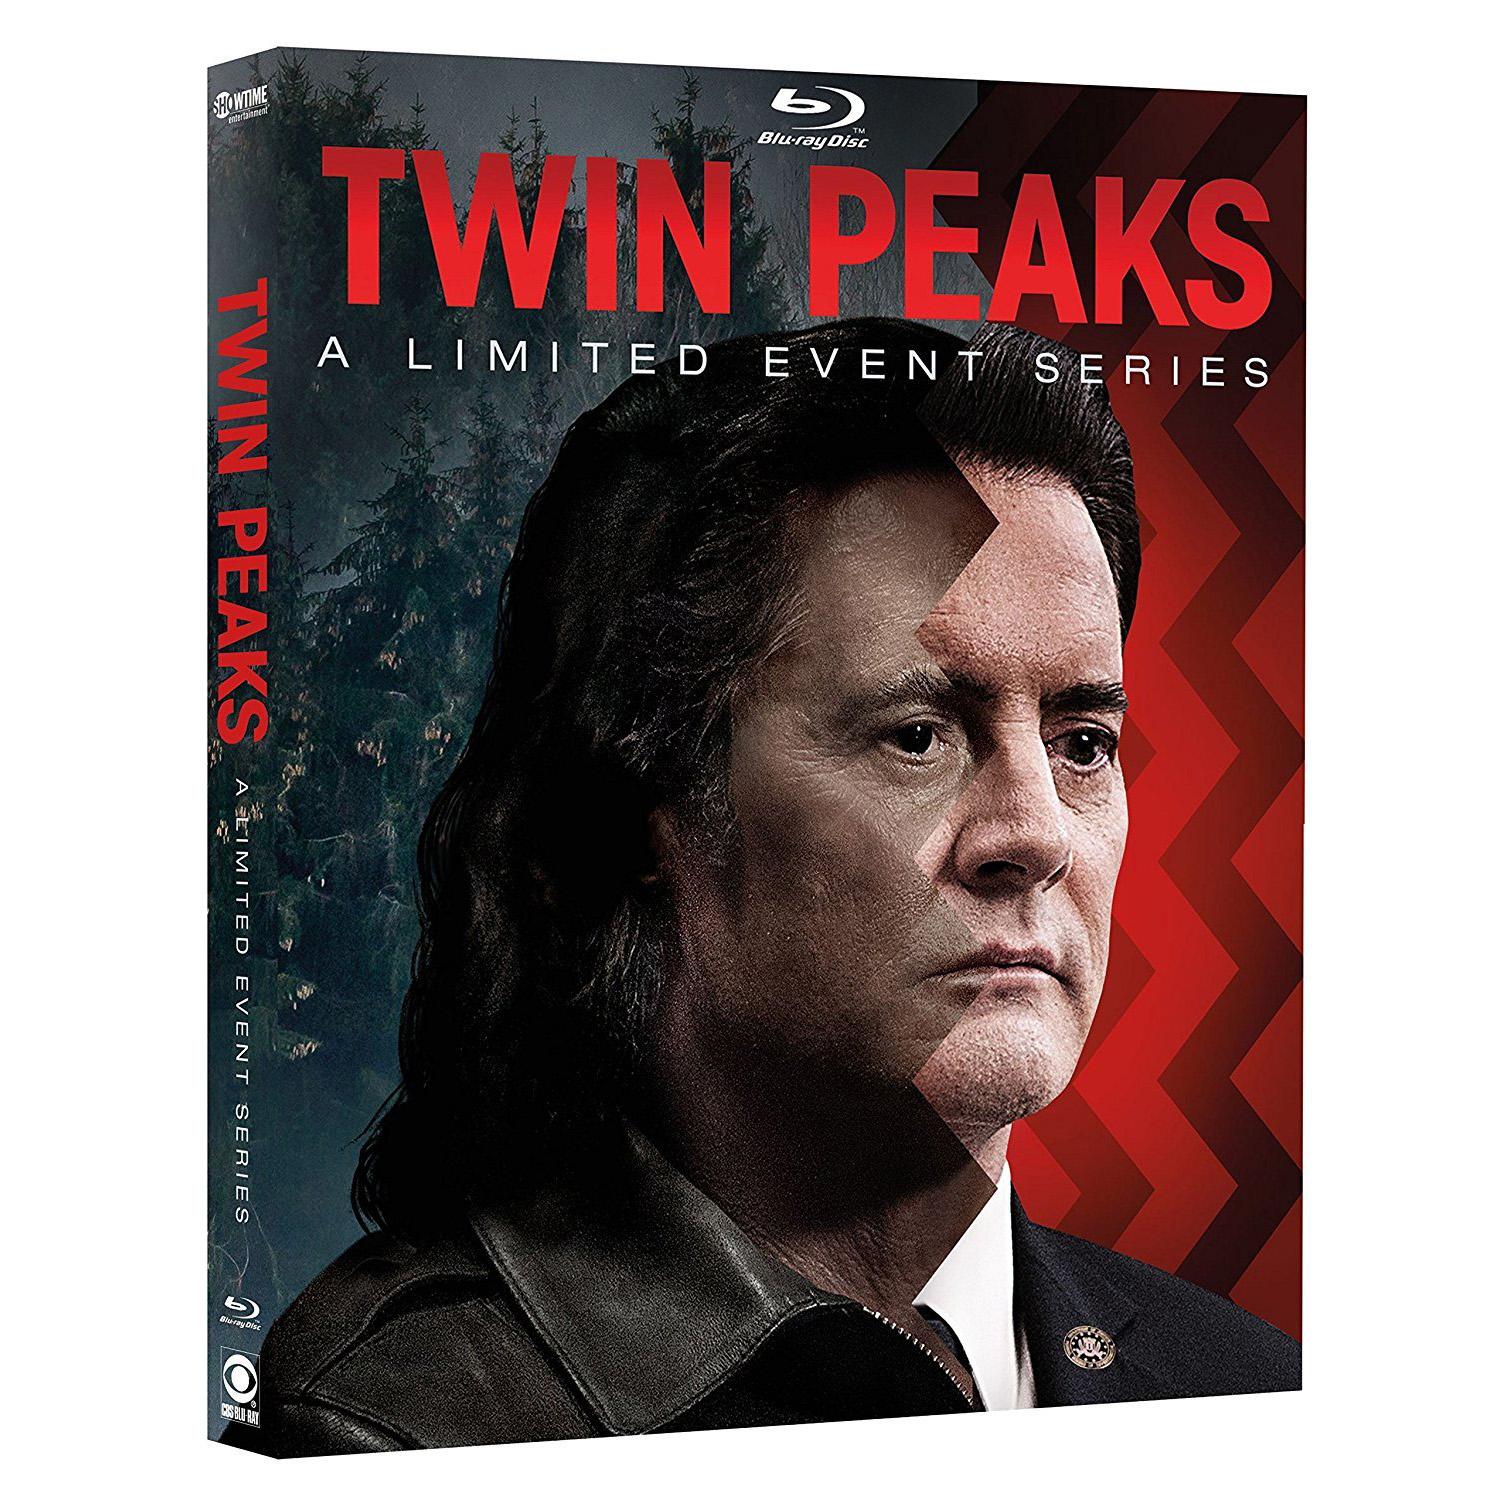 Twin Peaks A Limited Event Series Blu-ray for $24.99